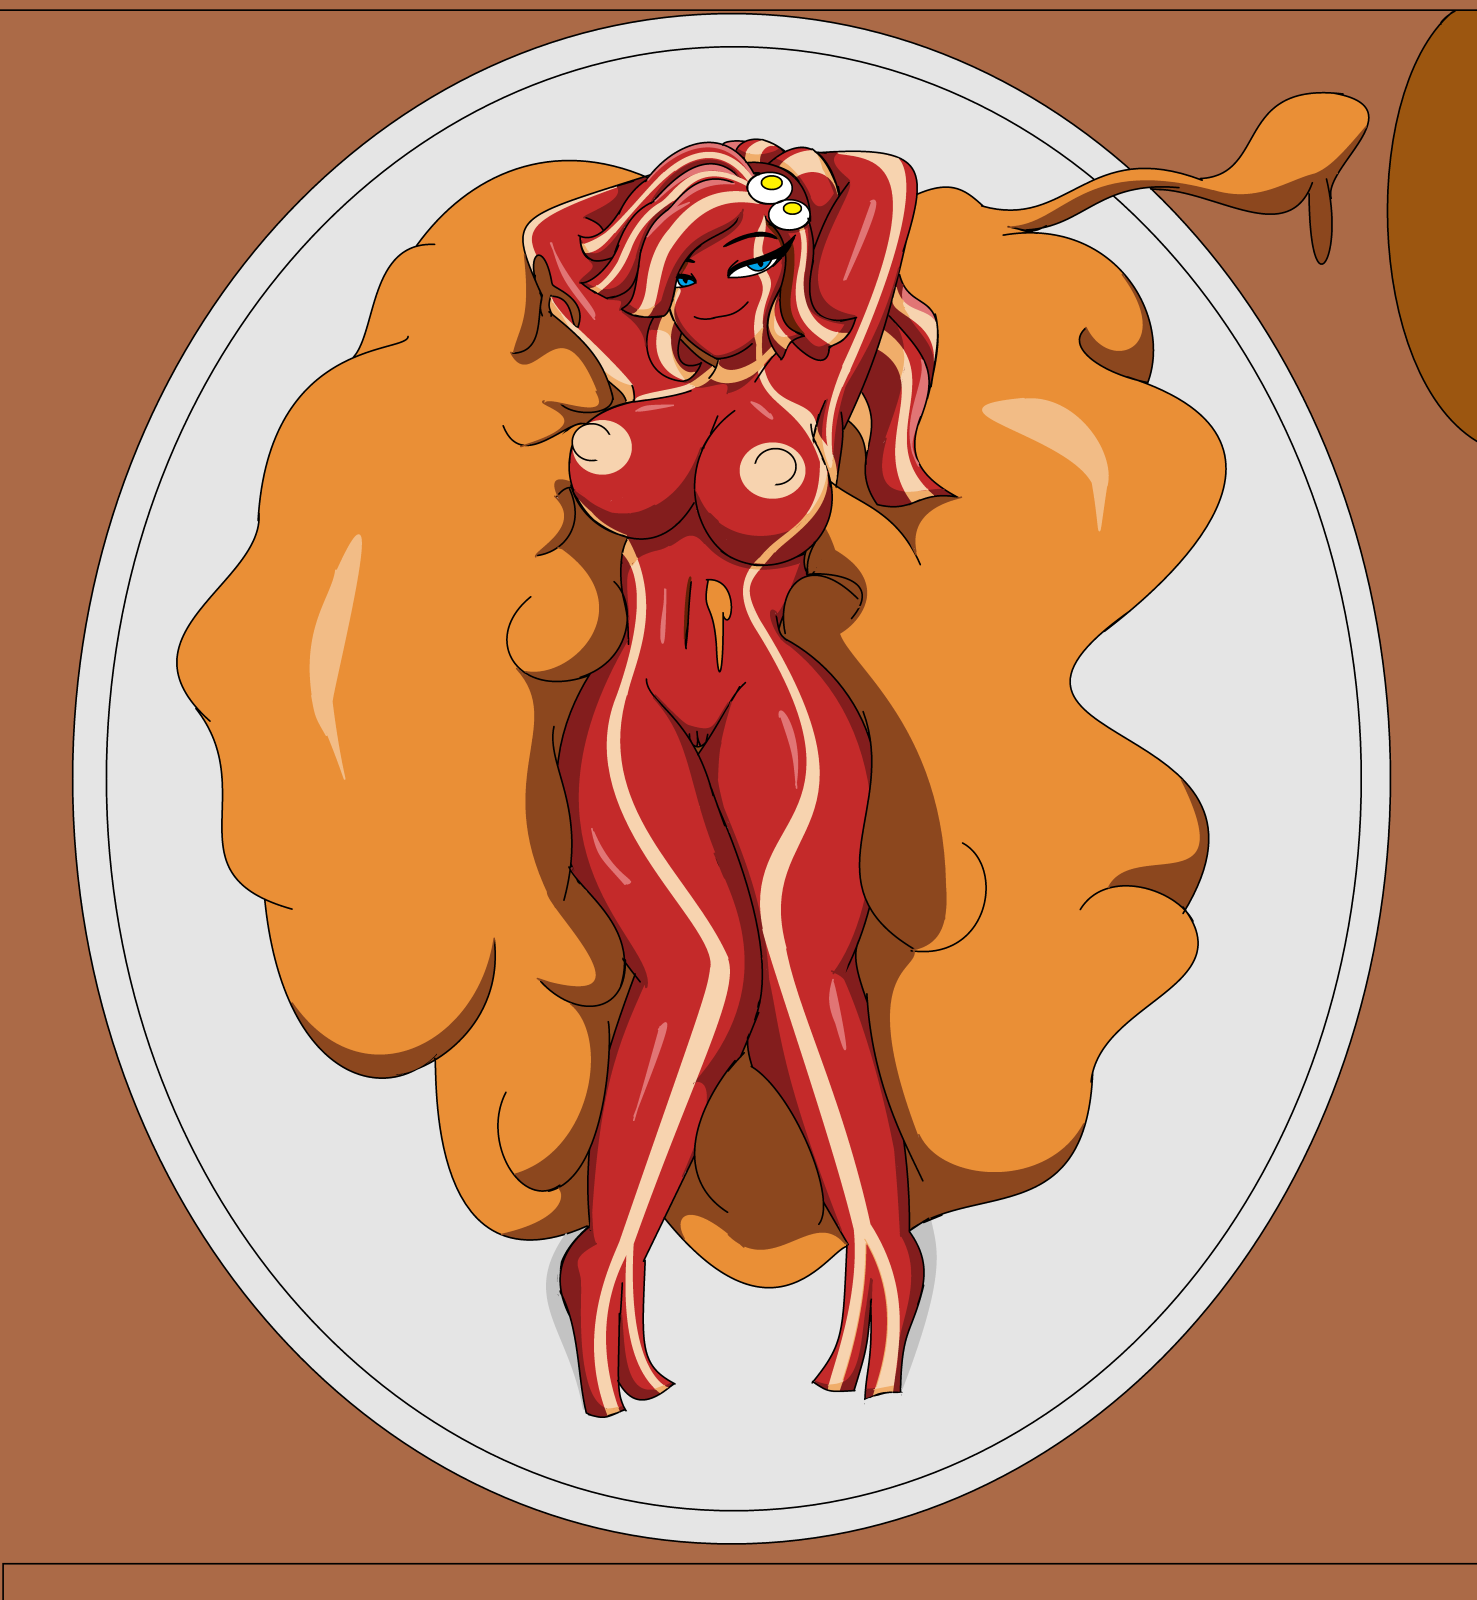 Bacon Lady nude 2.png